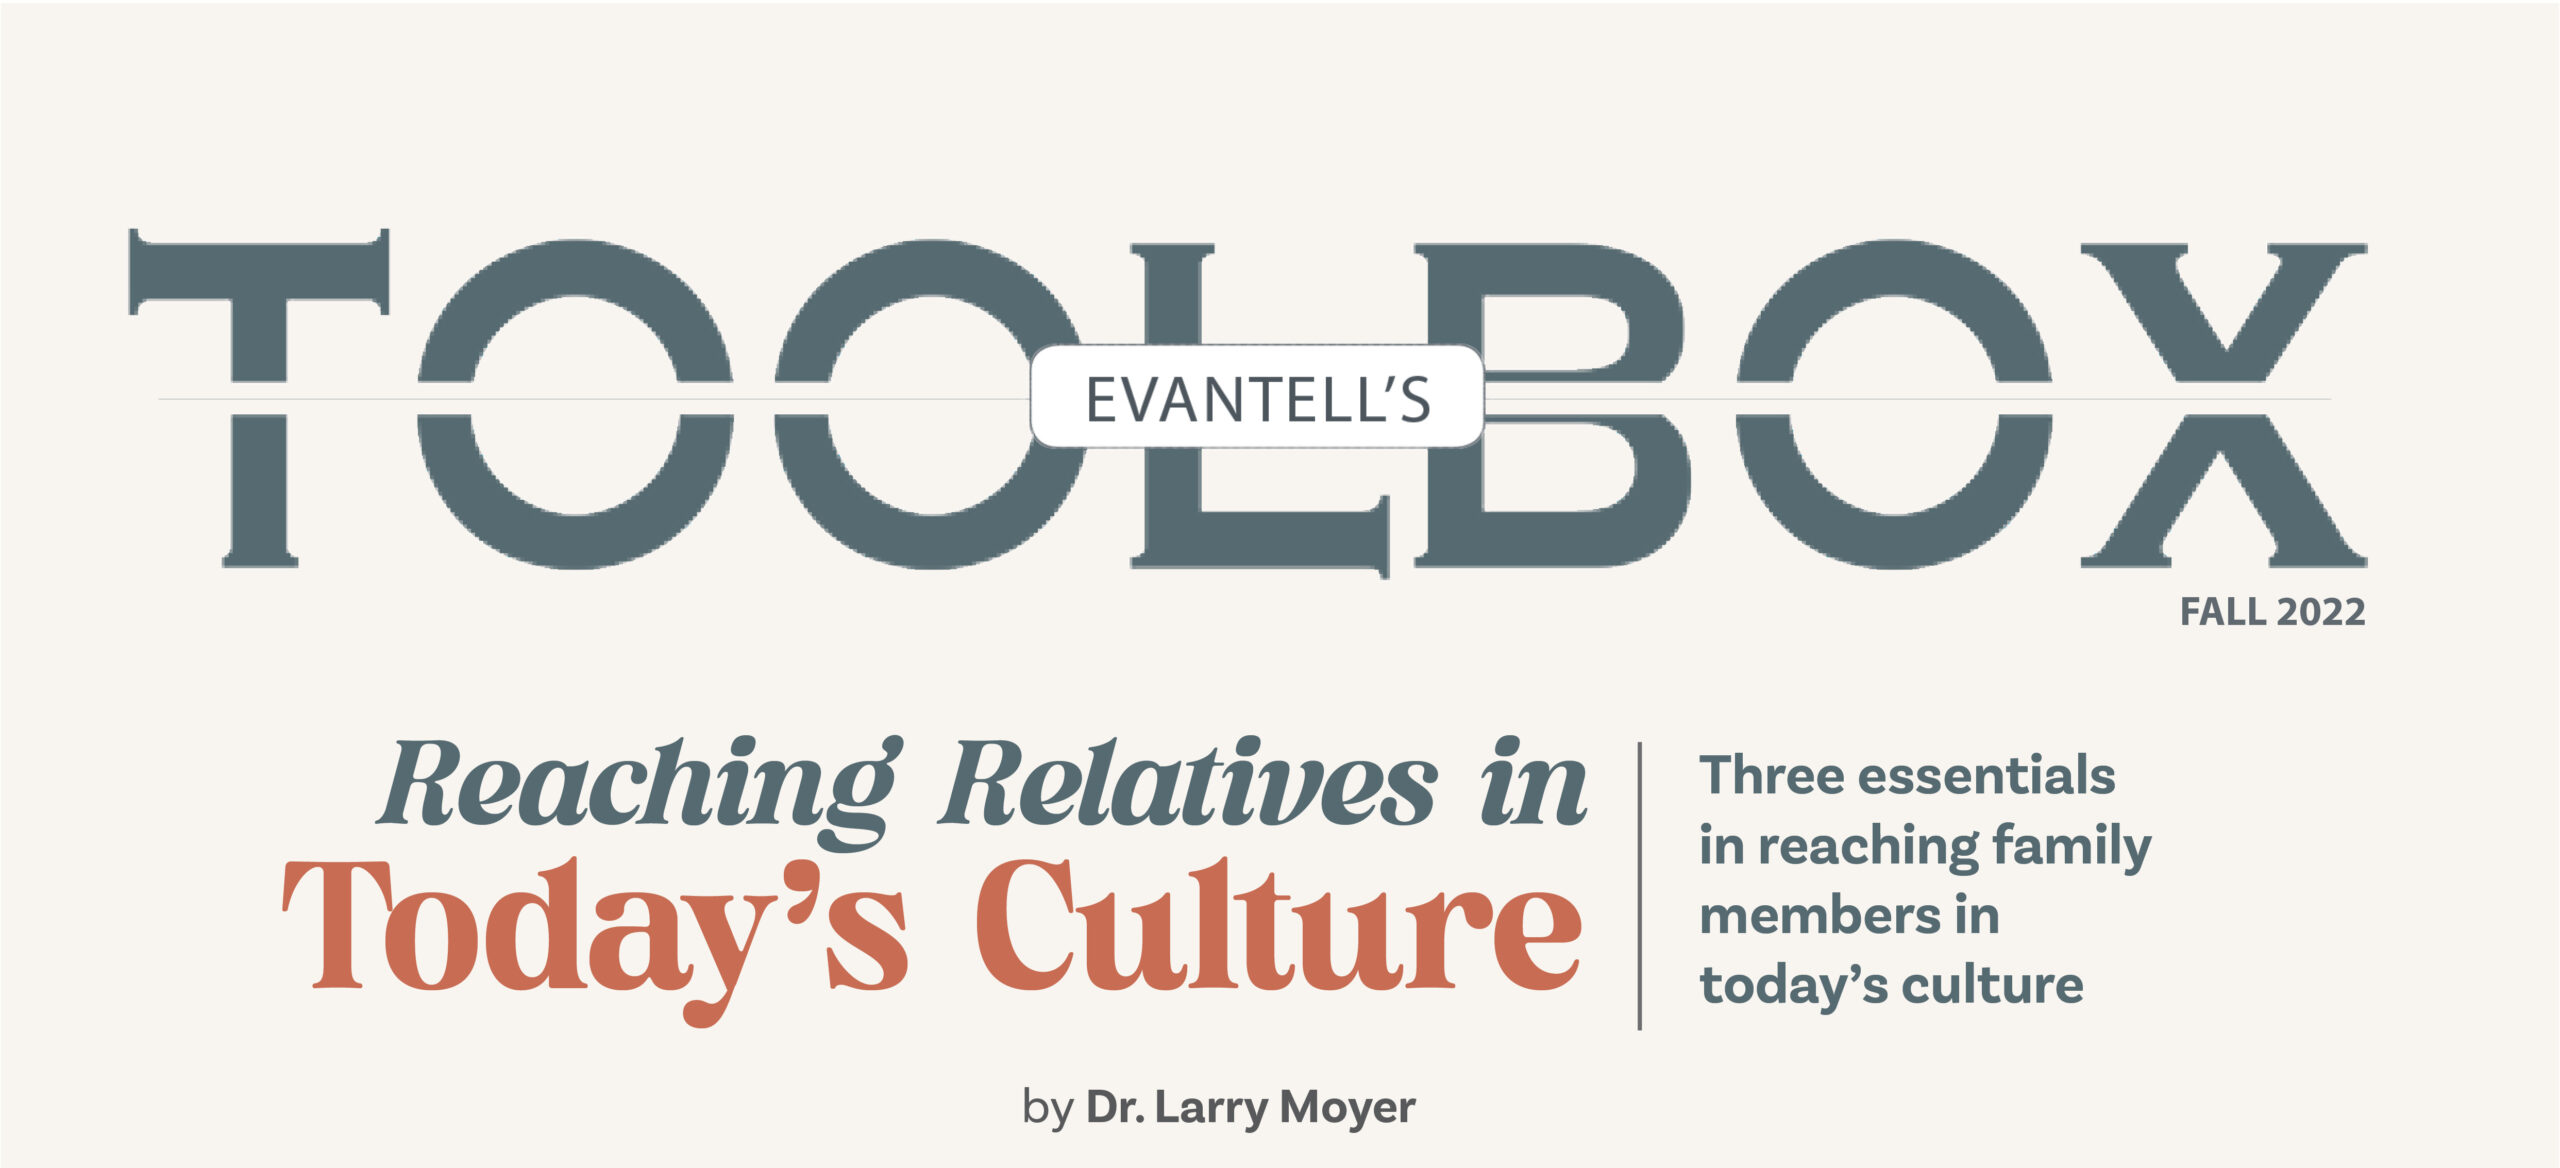 Toolbox: Reaching relatives in today's culture